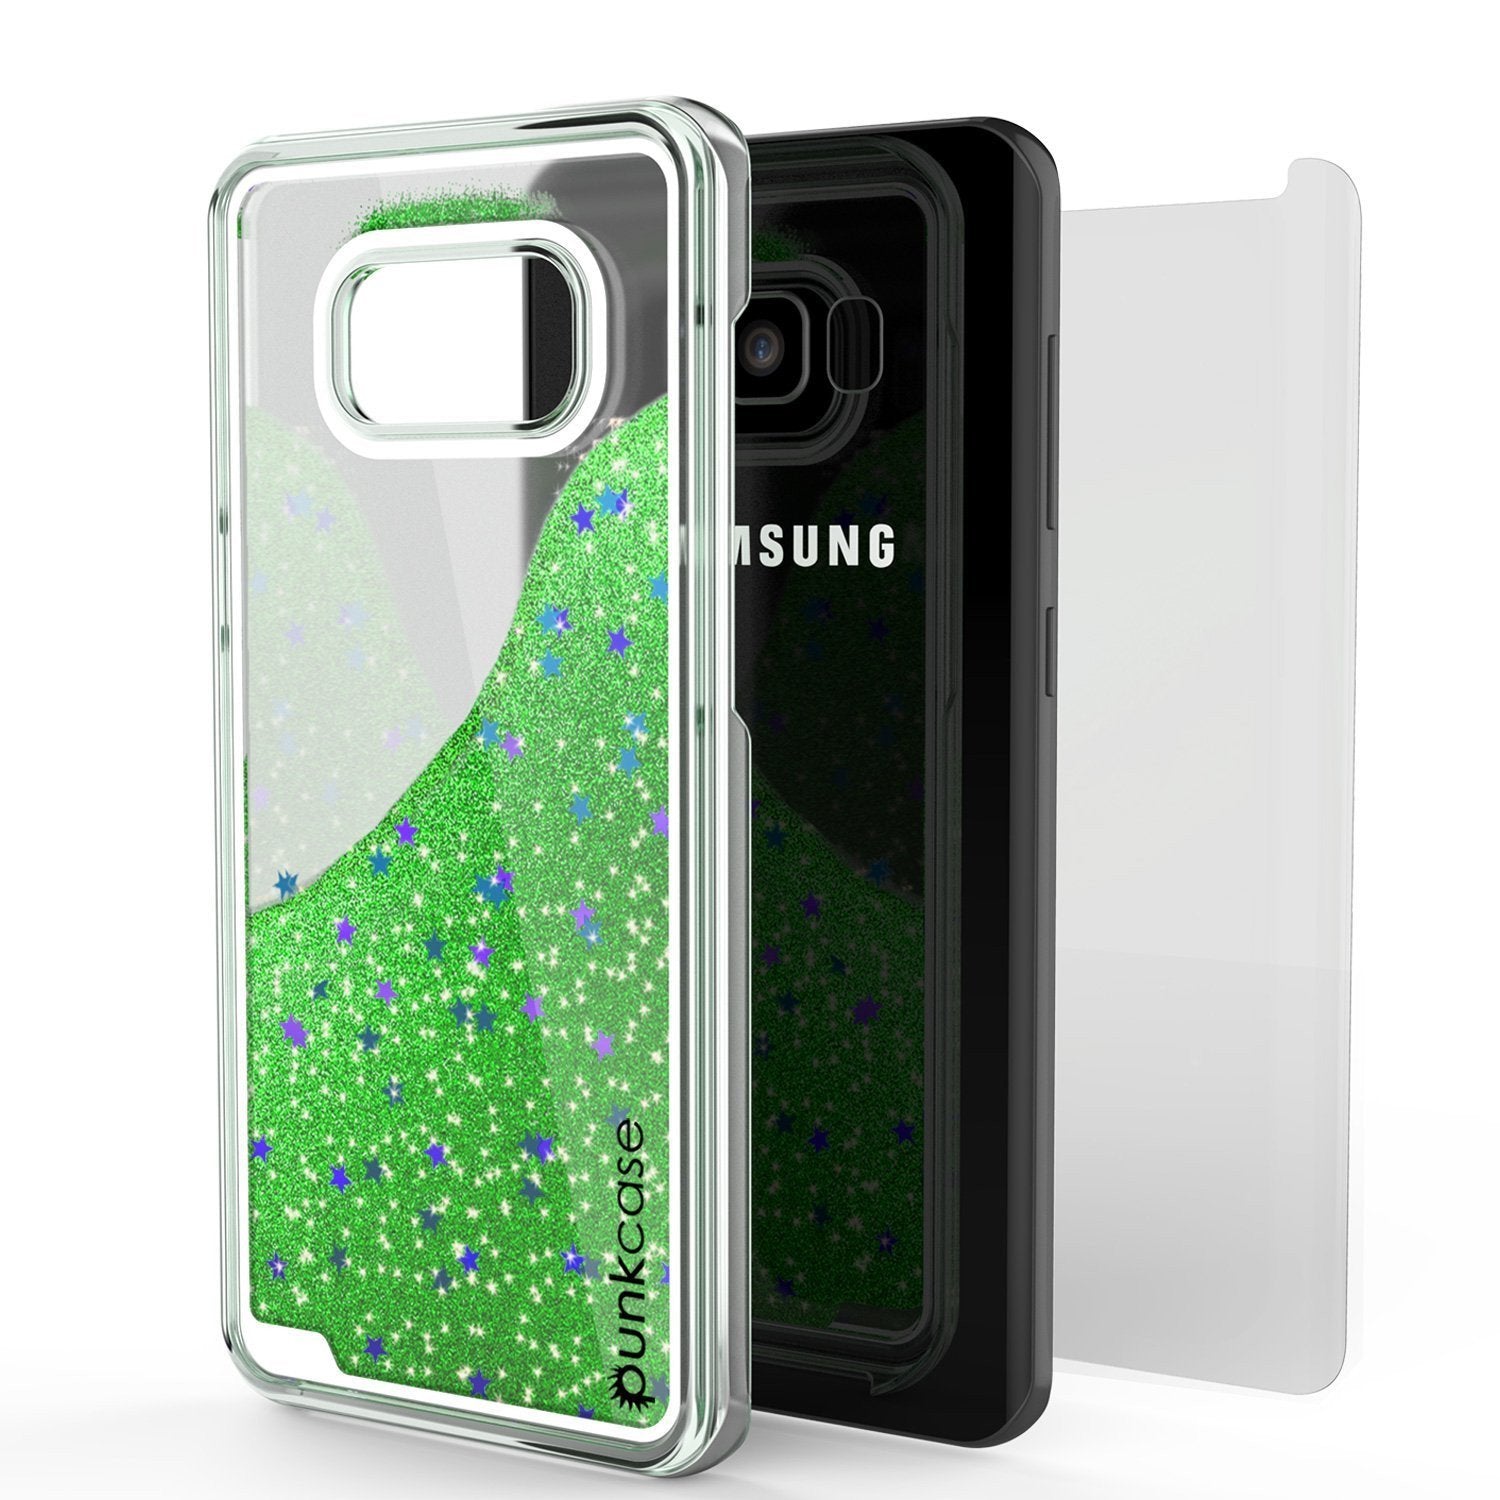 Galaxy S8 Case, Punkcase Liquid Green Series Protective Dual Layer Floating Glitter Cover - PunkCase NZ